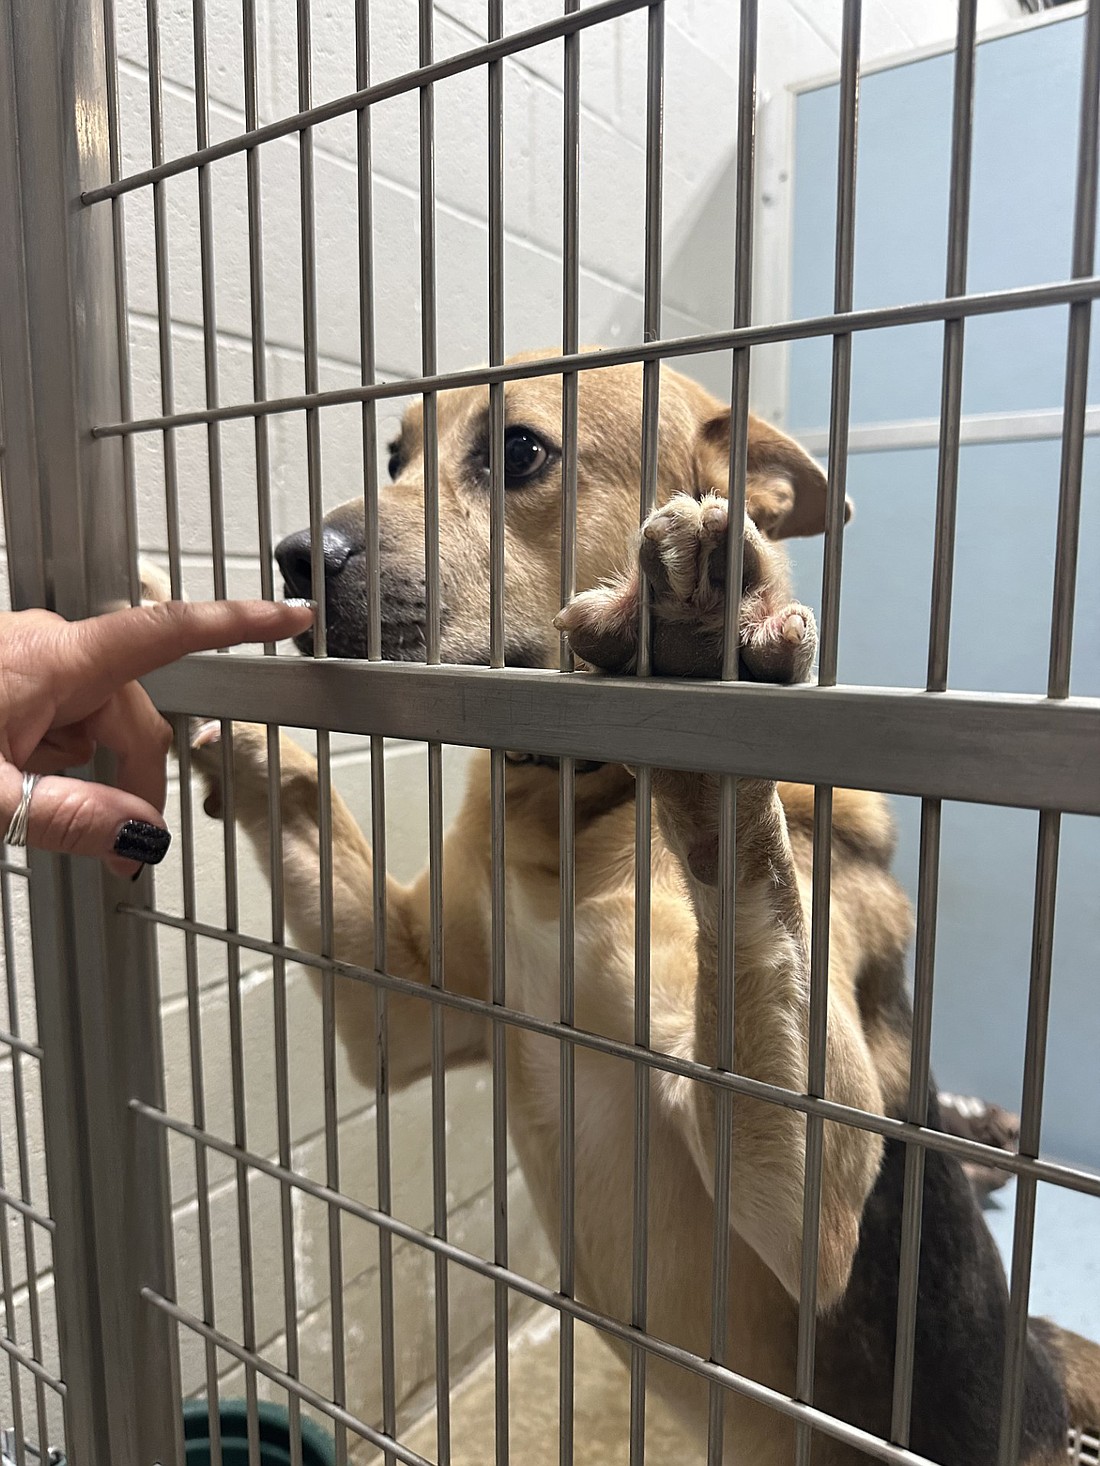 Butch was admitted to the Animal Welfare League of Kosciusko County on Feb. 3. Less than 2 years old, he is one of 85 dogs in the shelter. Photo by David Slone, Times-Union.